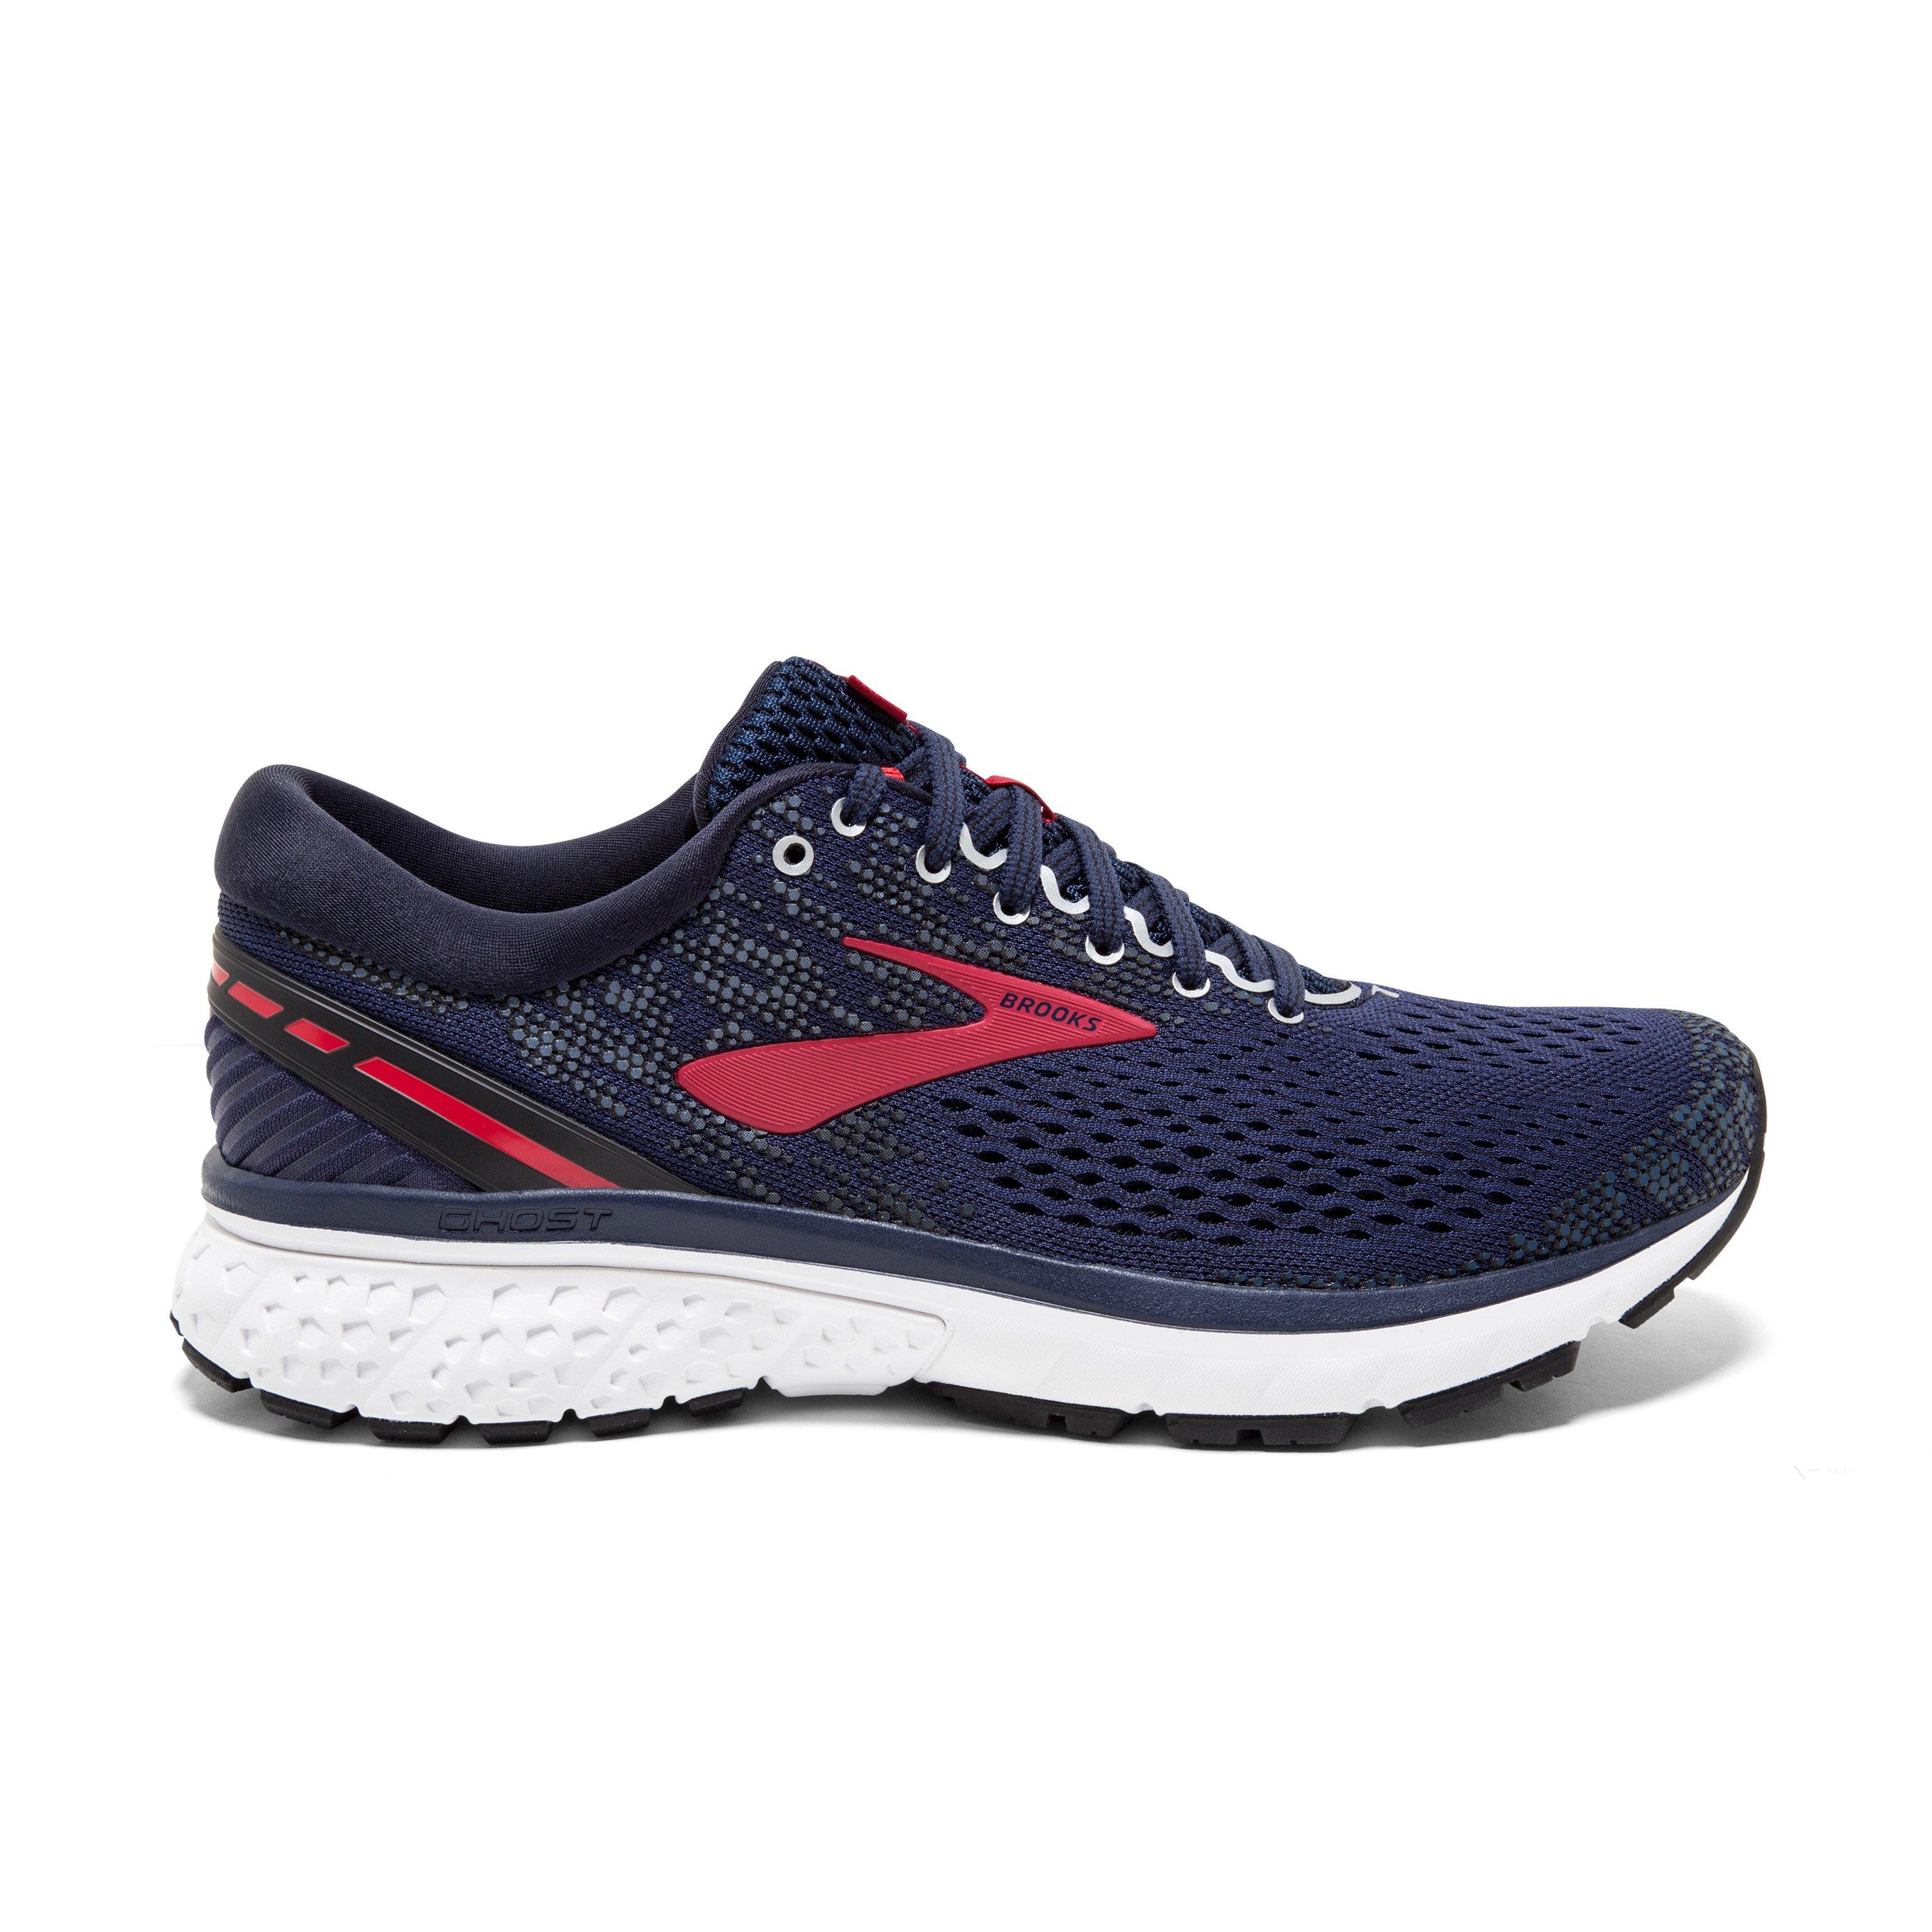 brooks men's ghost 11 running shoes